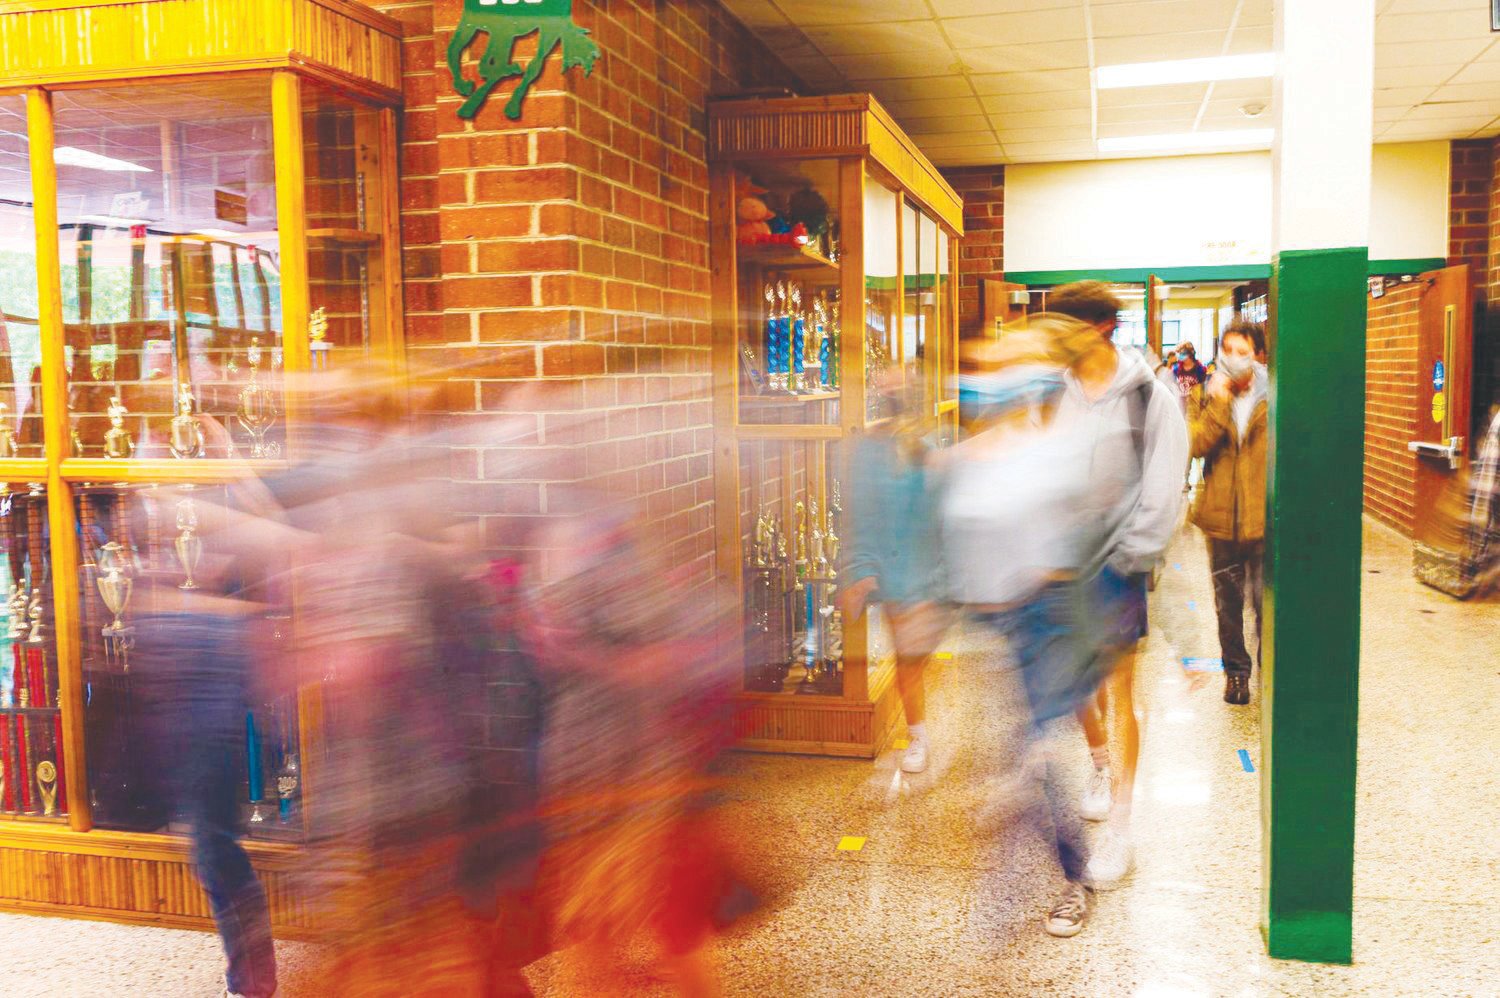 Students change classes in the hallway of Northwood High School last spring. This year, many students are struggling in the middle of a third school year impacted by the pandemic.